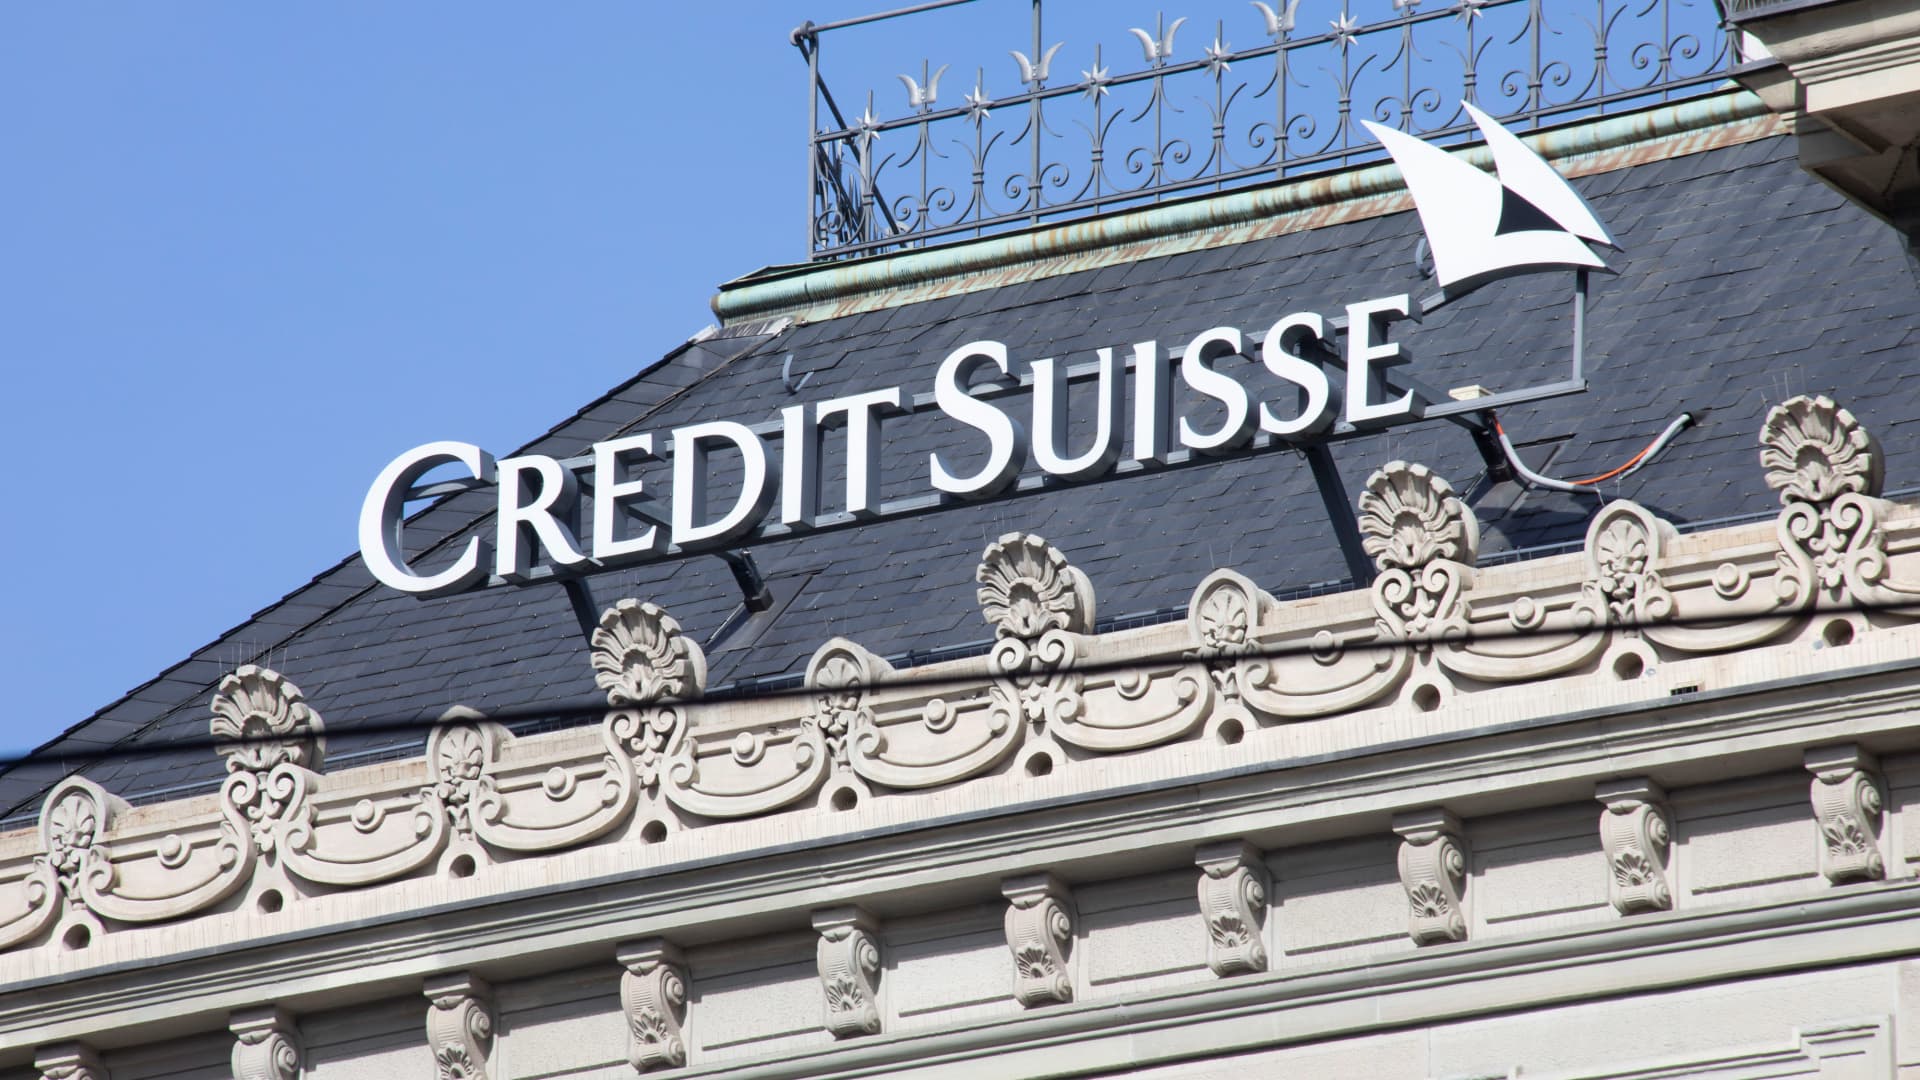 UBS agrees to buy Credit Suisse as regulators look to shore up global banking system